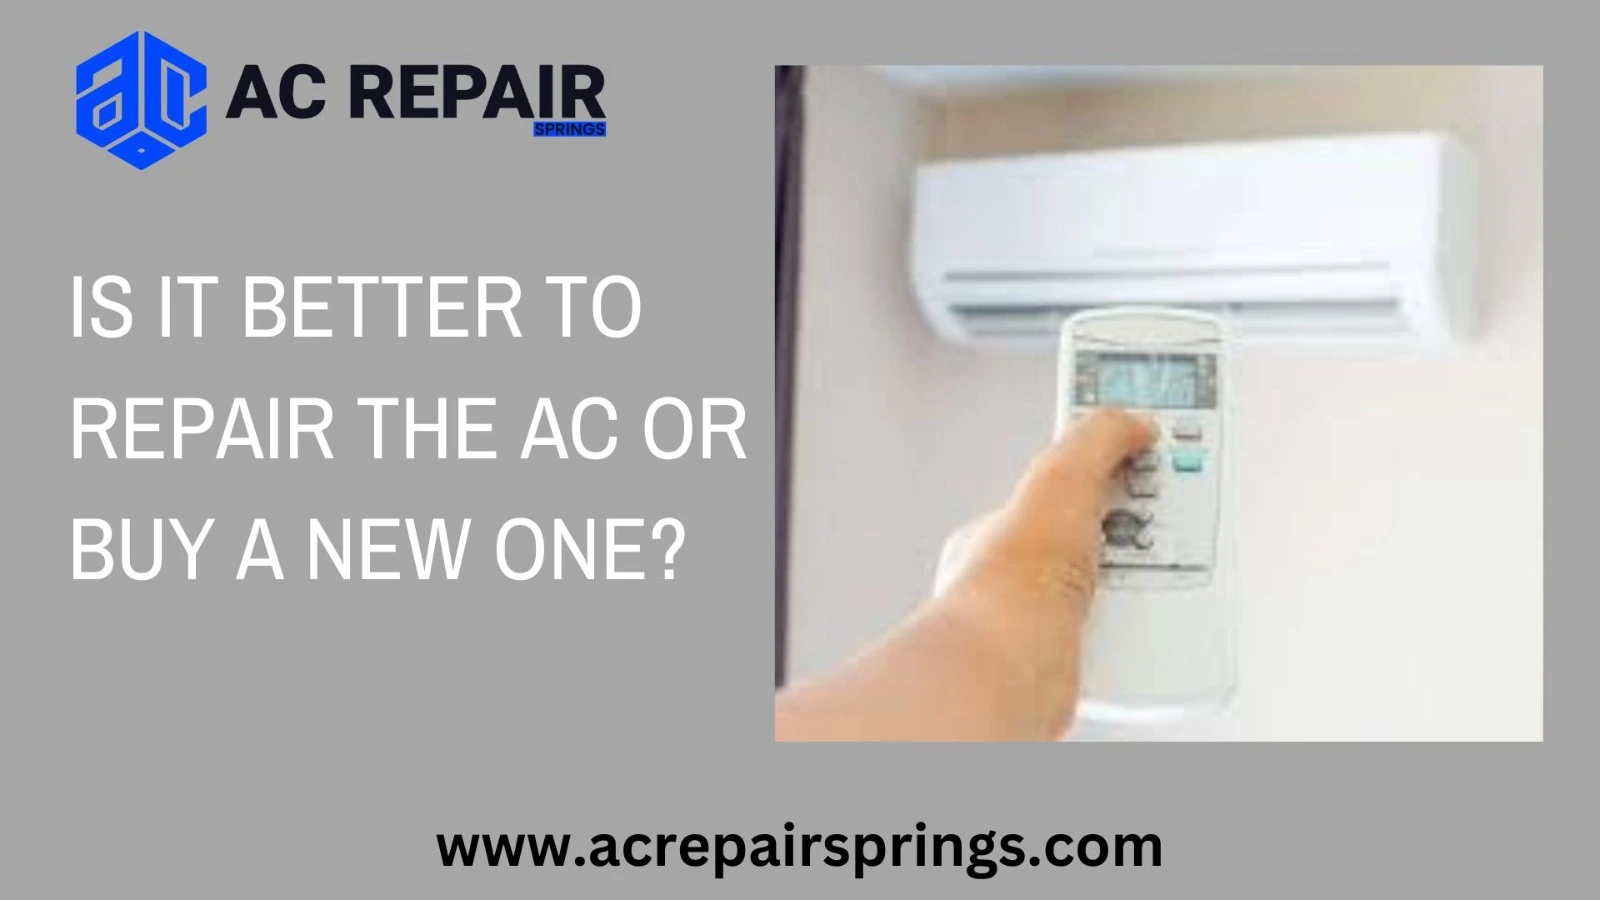 Is It Better To Repair the AC Or Buy A New One?